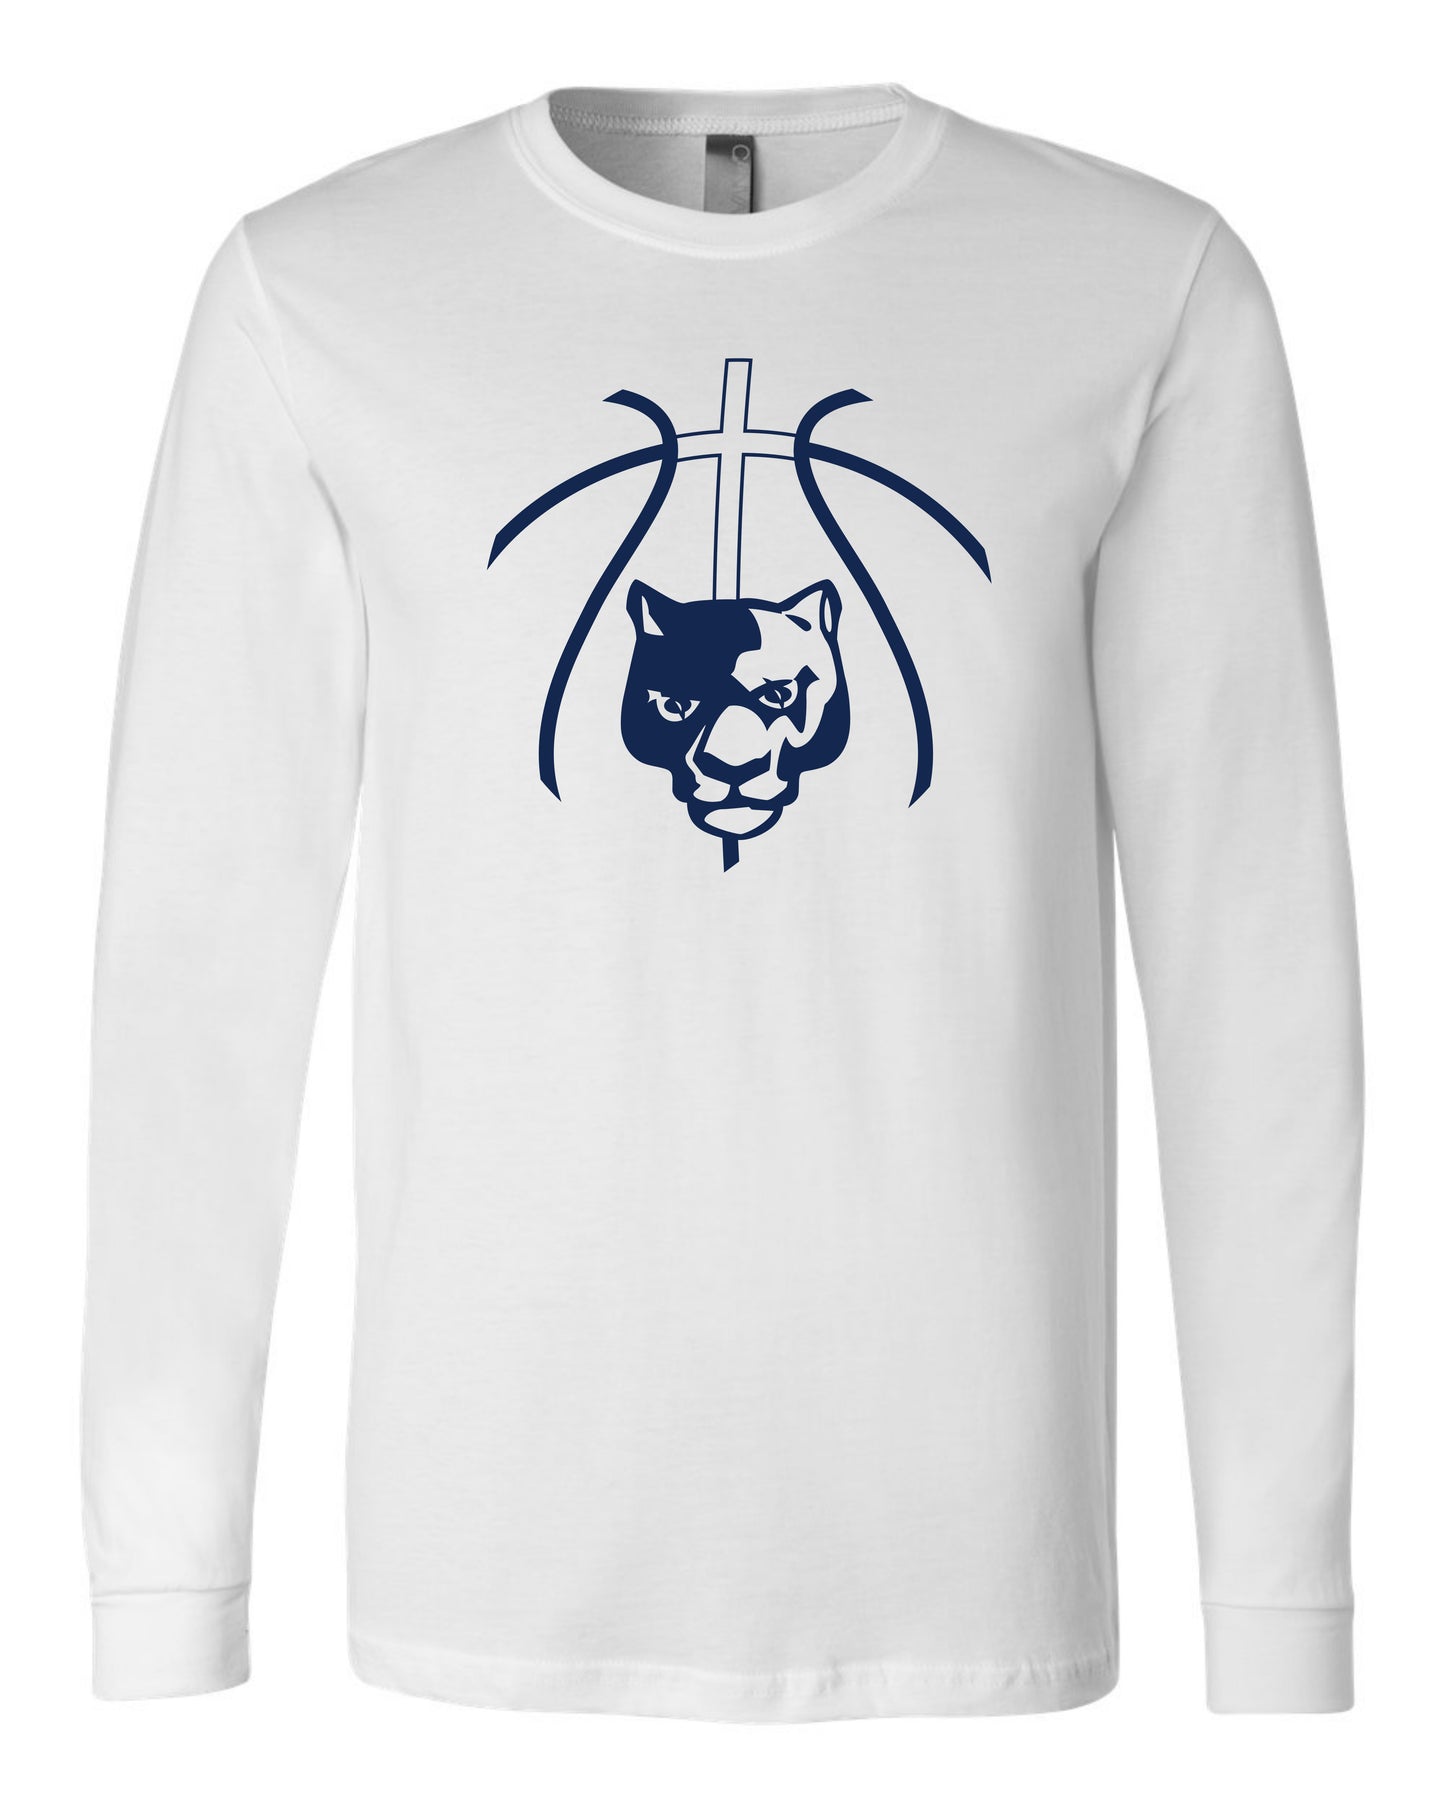 Panther Head Cross Ball - Youth Long Sleeve